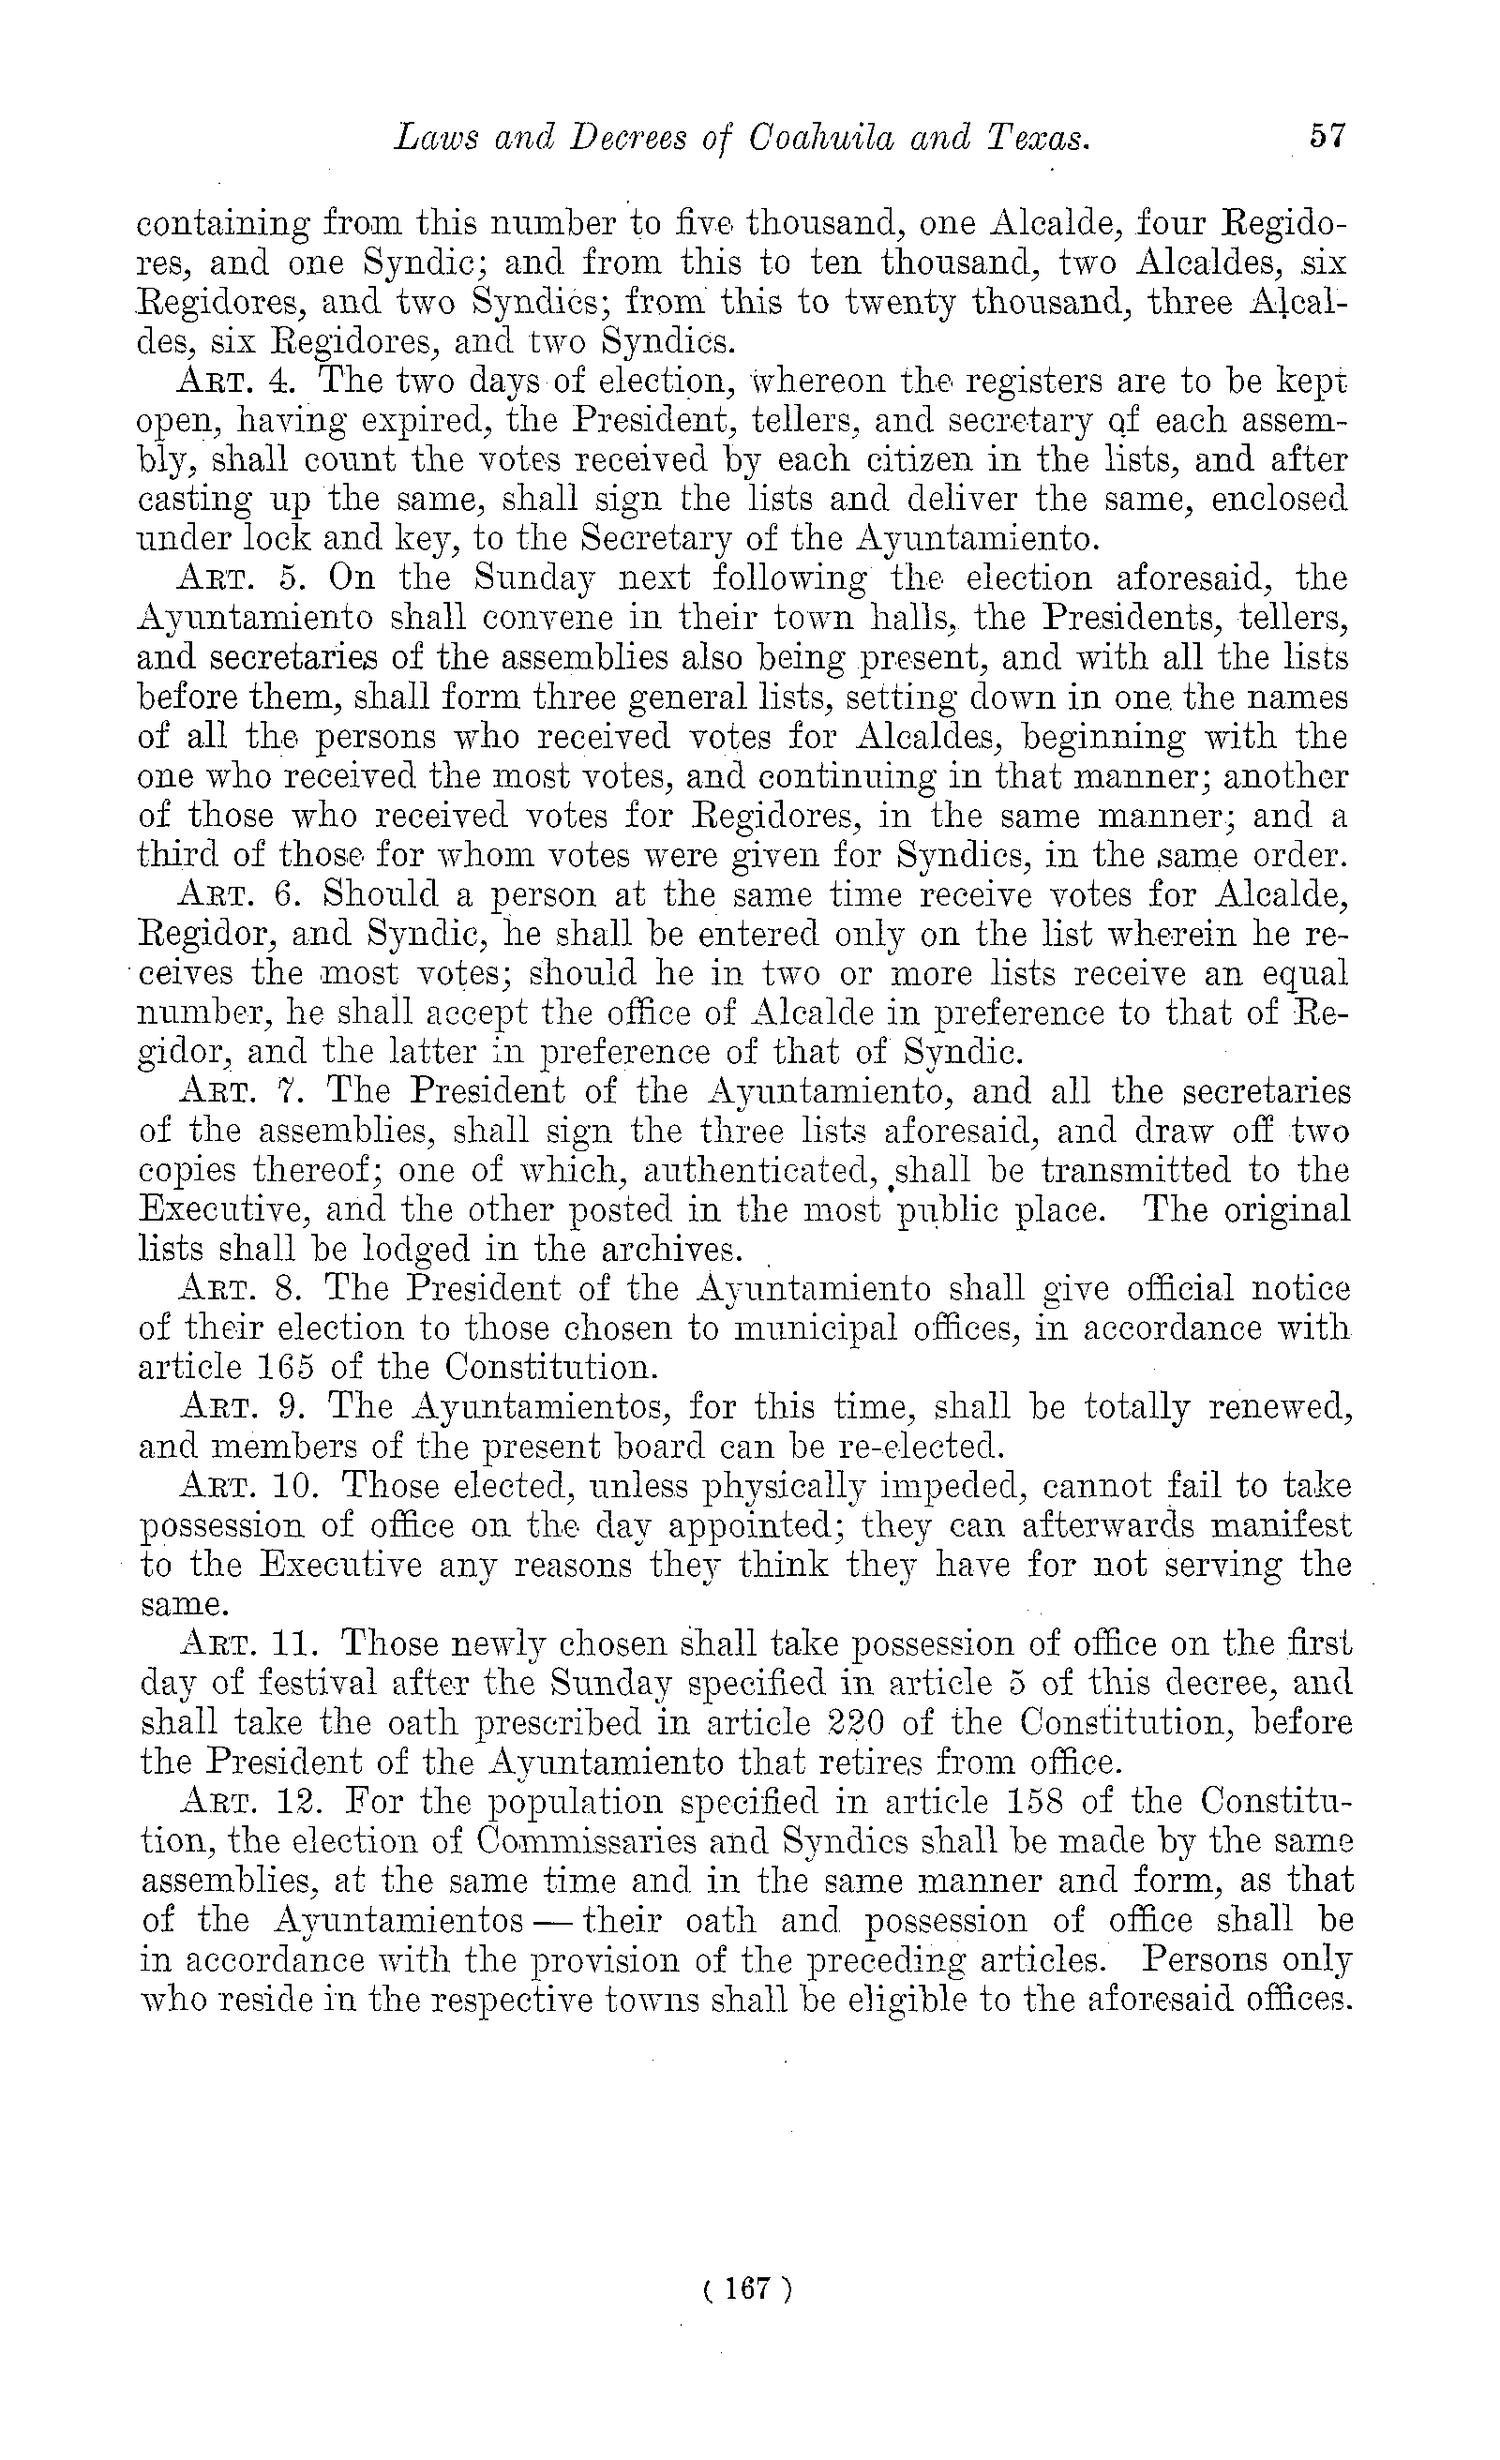 The Laws of Texas, 1822-1897 Volume 1
                                                
                                                    167
                                                